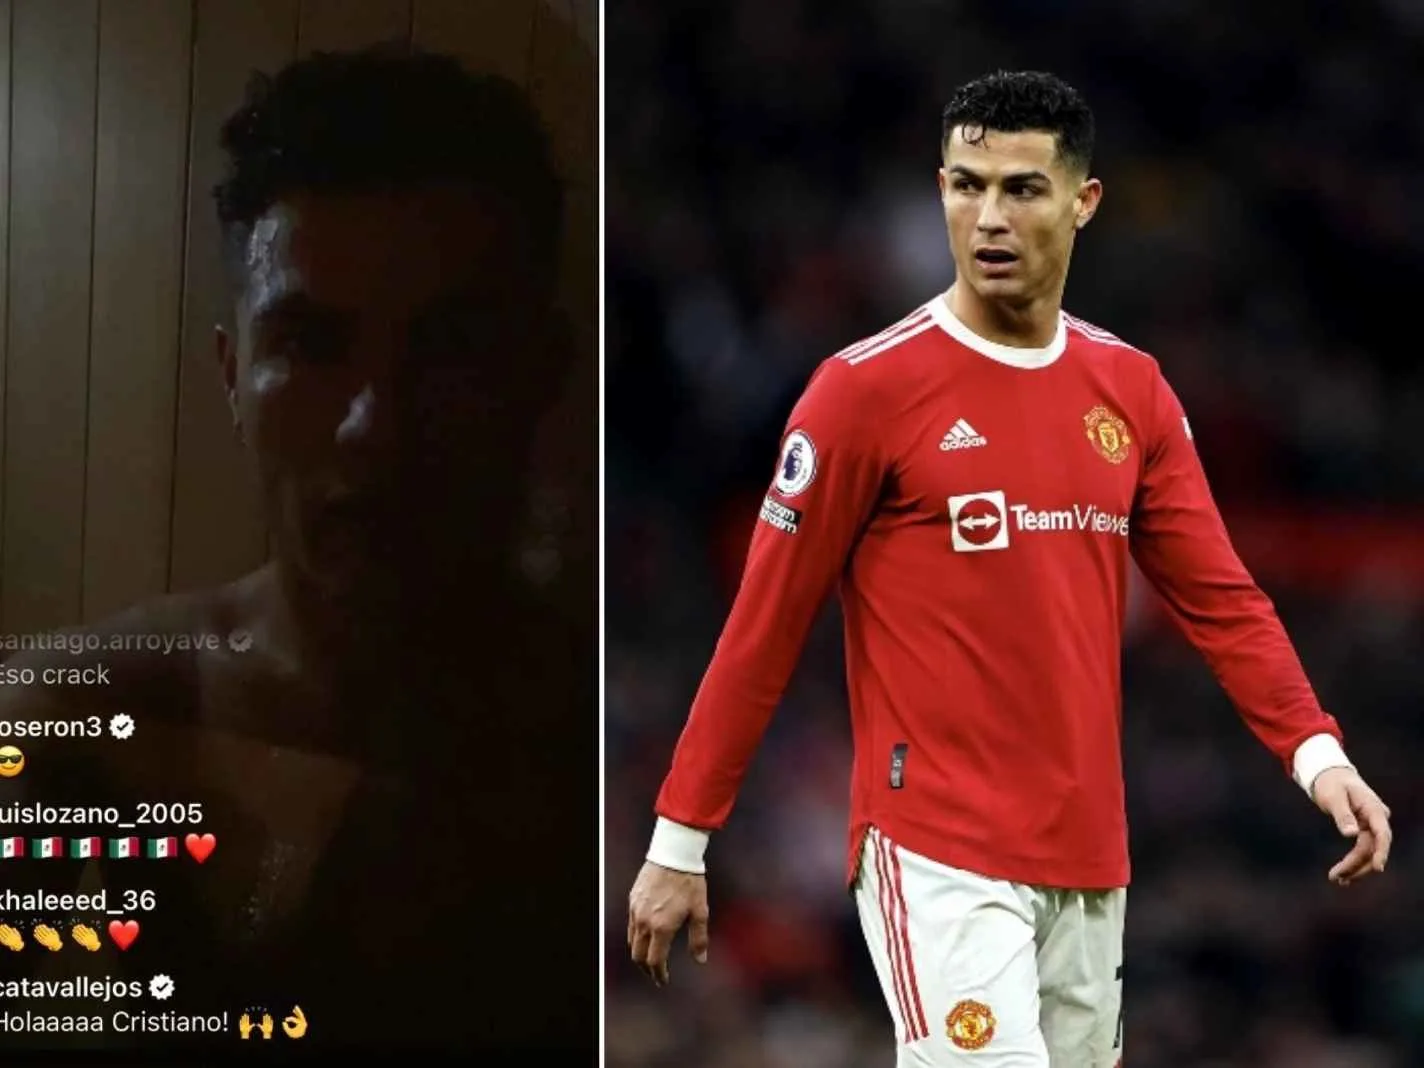 Cryptic Ronaldo live has fans confused